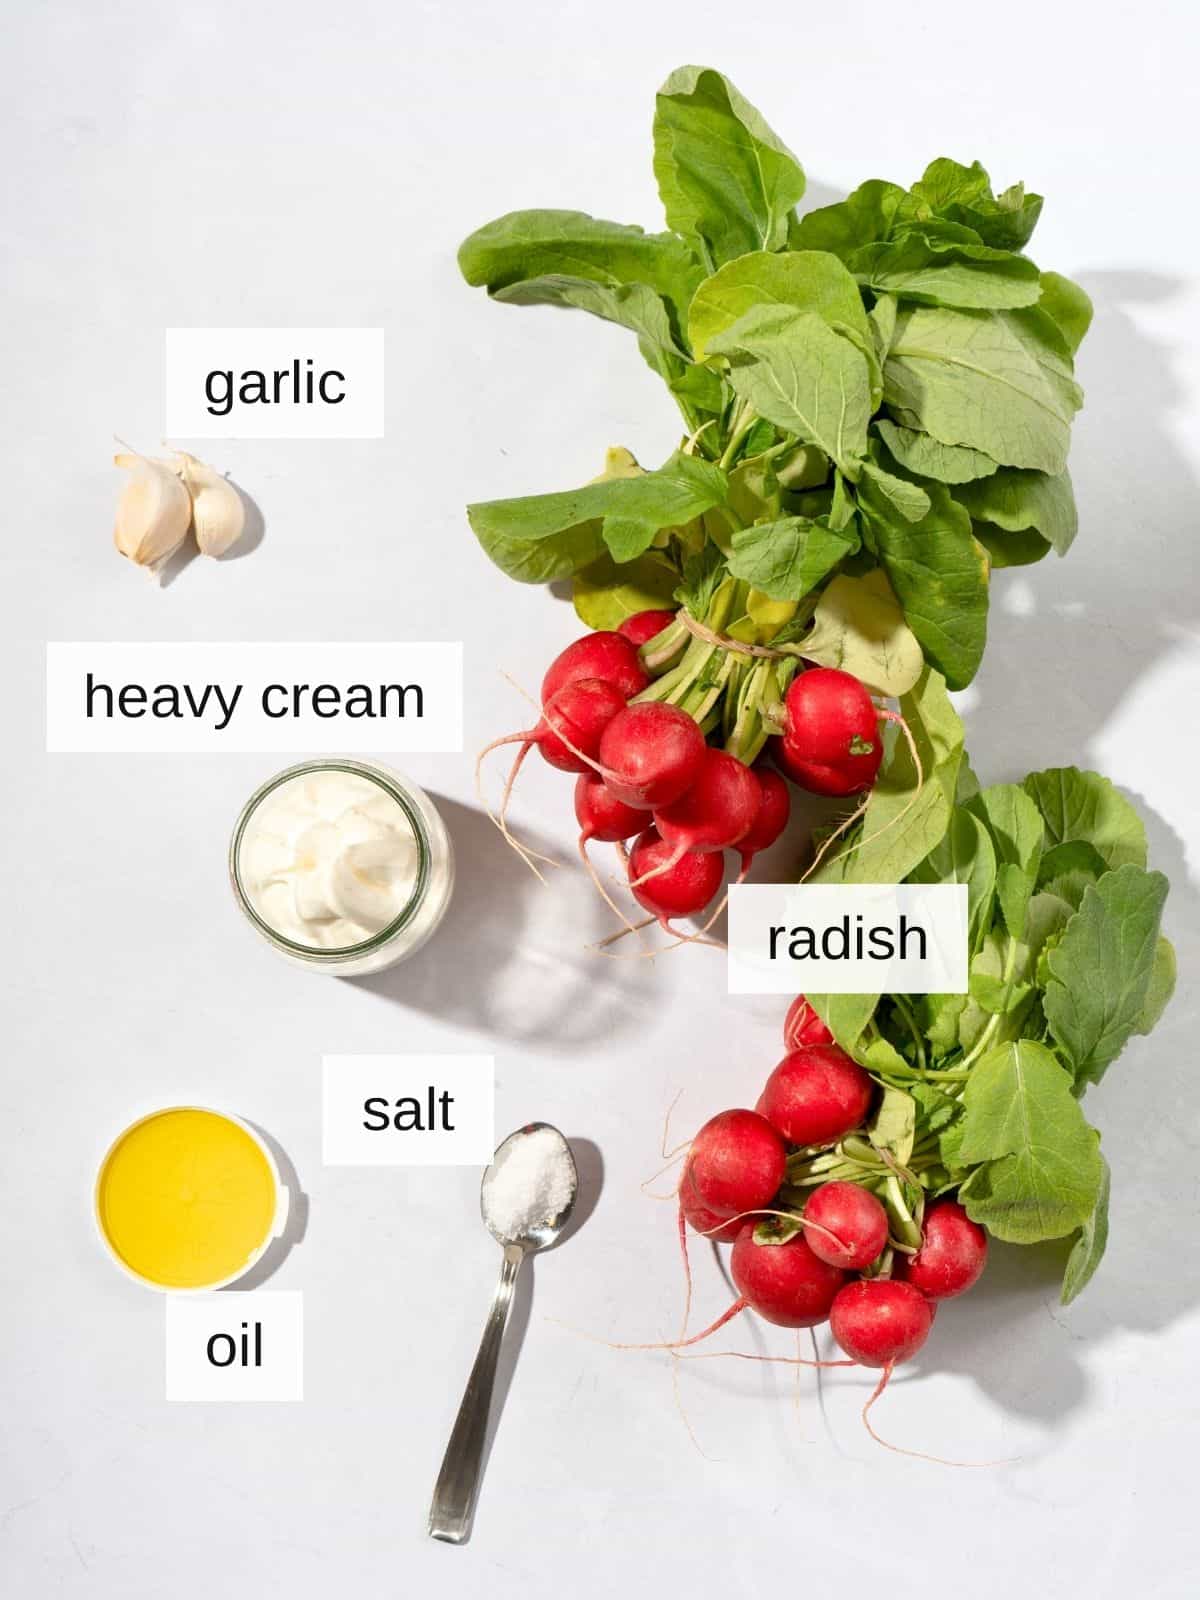 ingredients for mashed radish recipe, including garlic, heavy cream, salt, oil or butter, and radish.